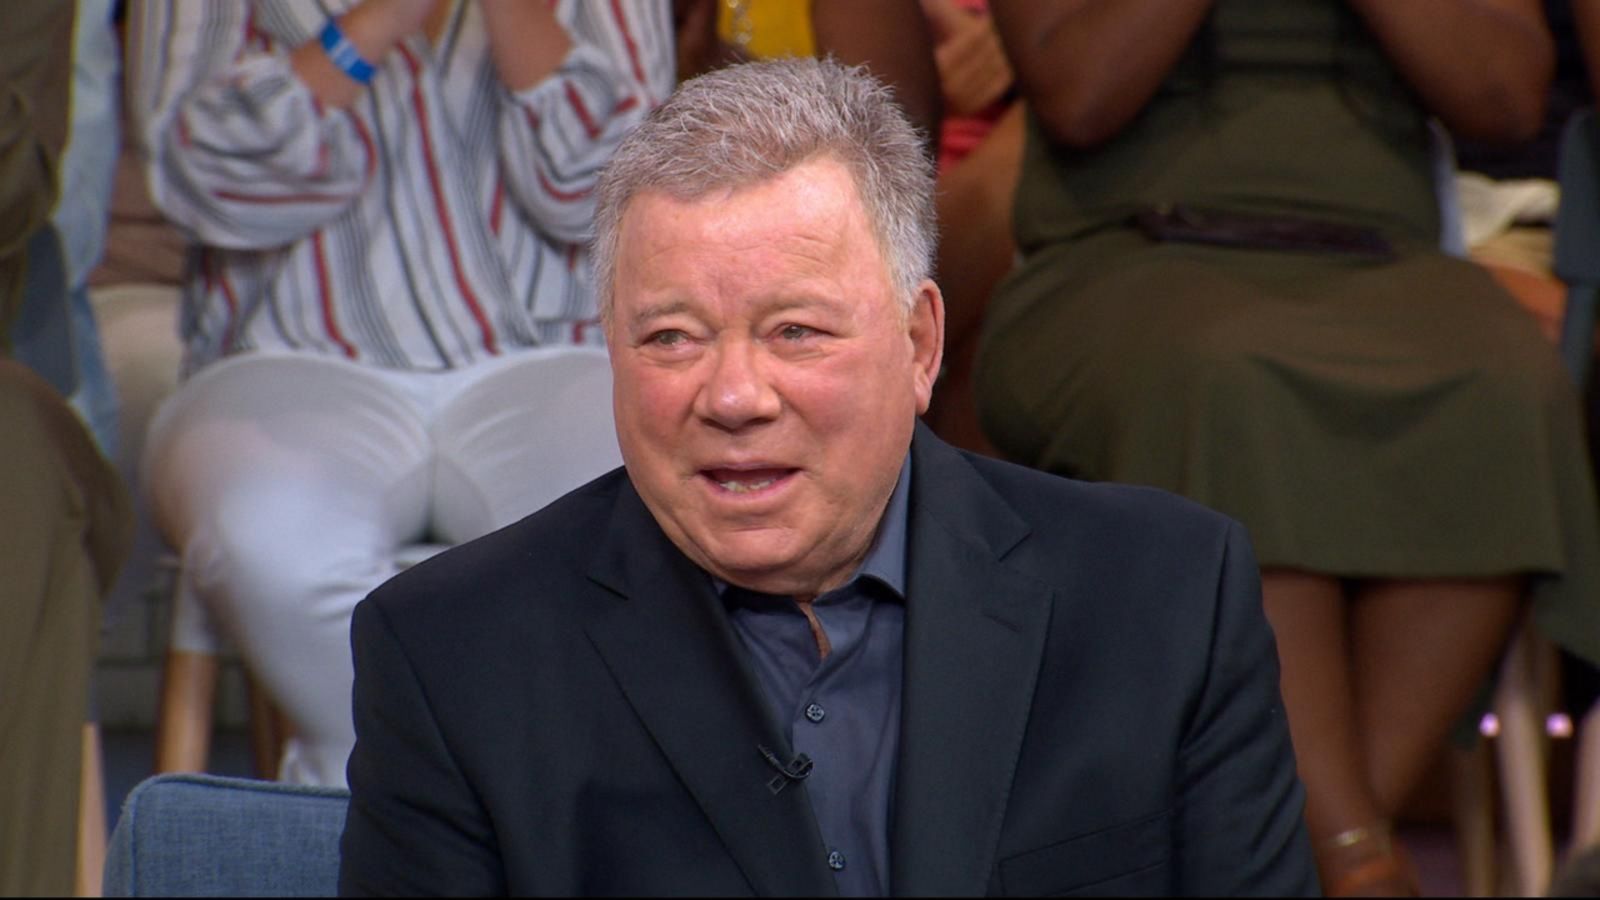 Family Helps Return William Shatner's Wallet After He Left It at